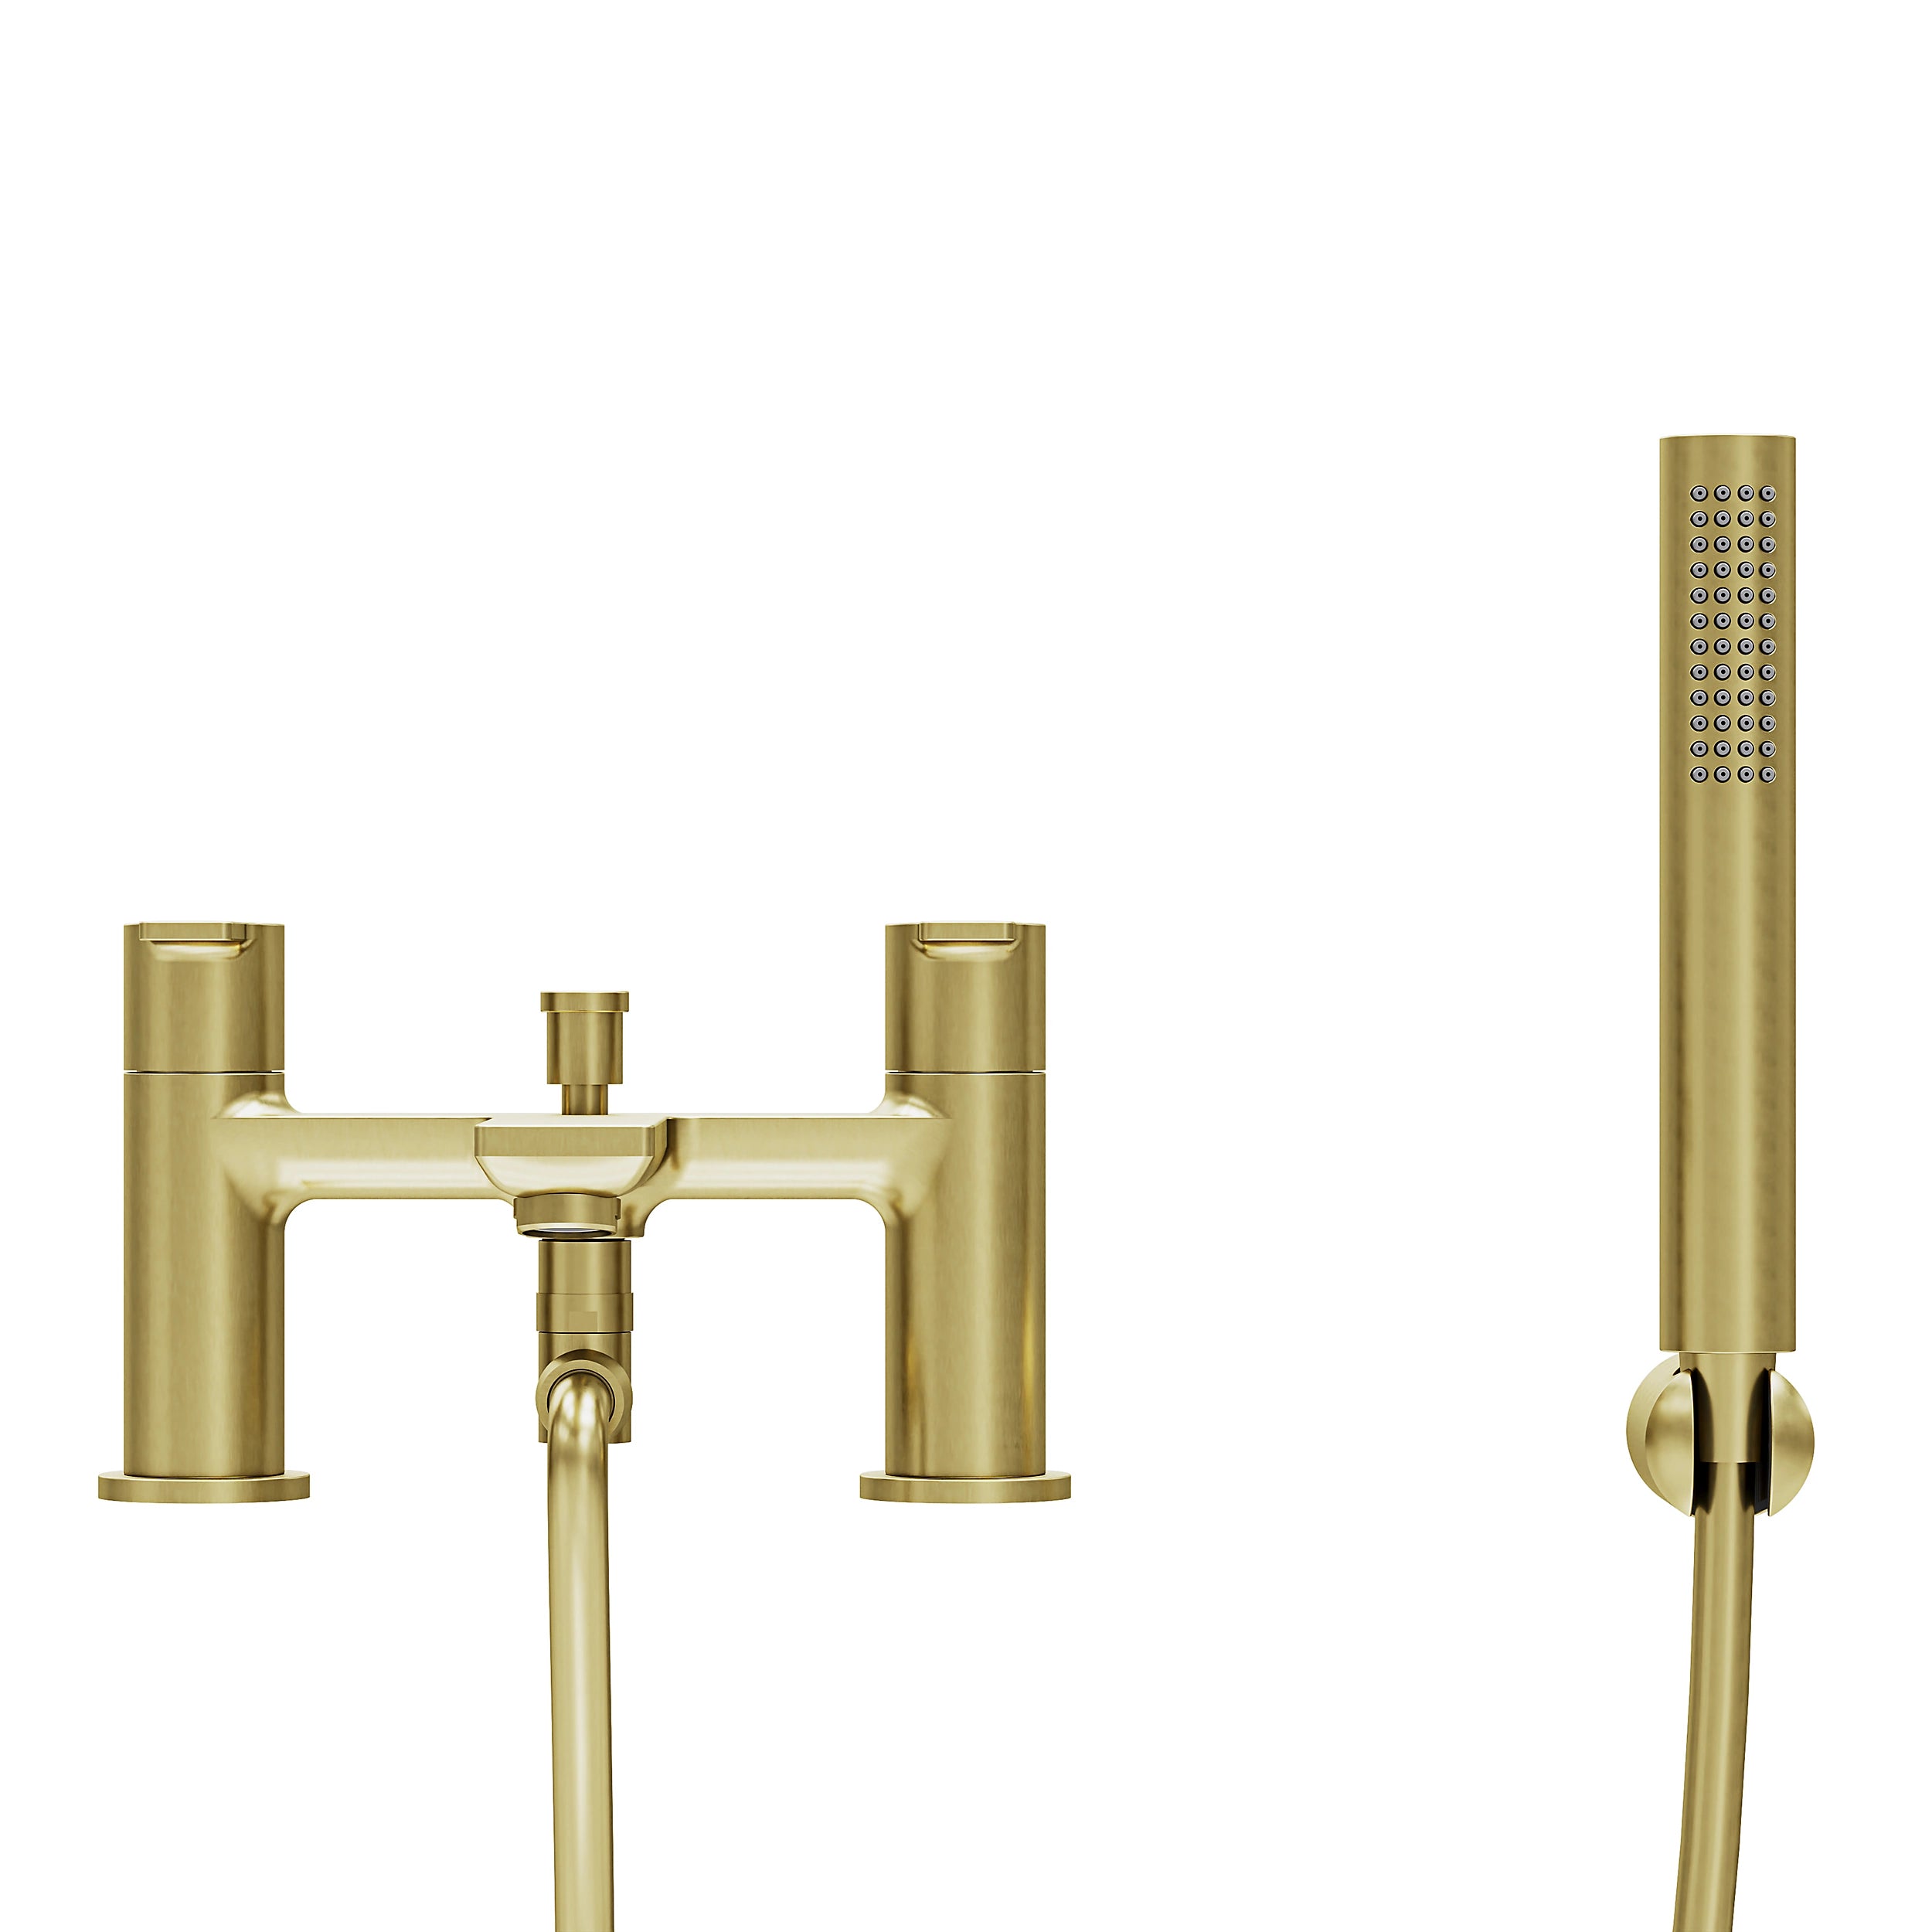 GoodHome Akita Satin Brass effect Ceramic Deck-mounted Double Bath shower mixer tap with shower kit 0357